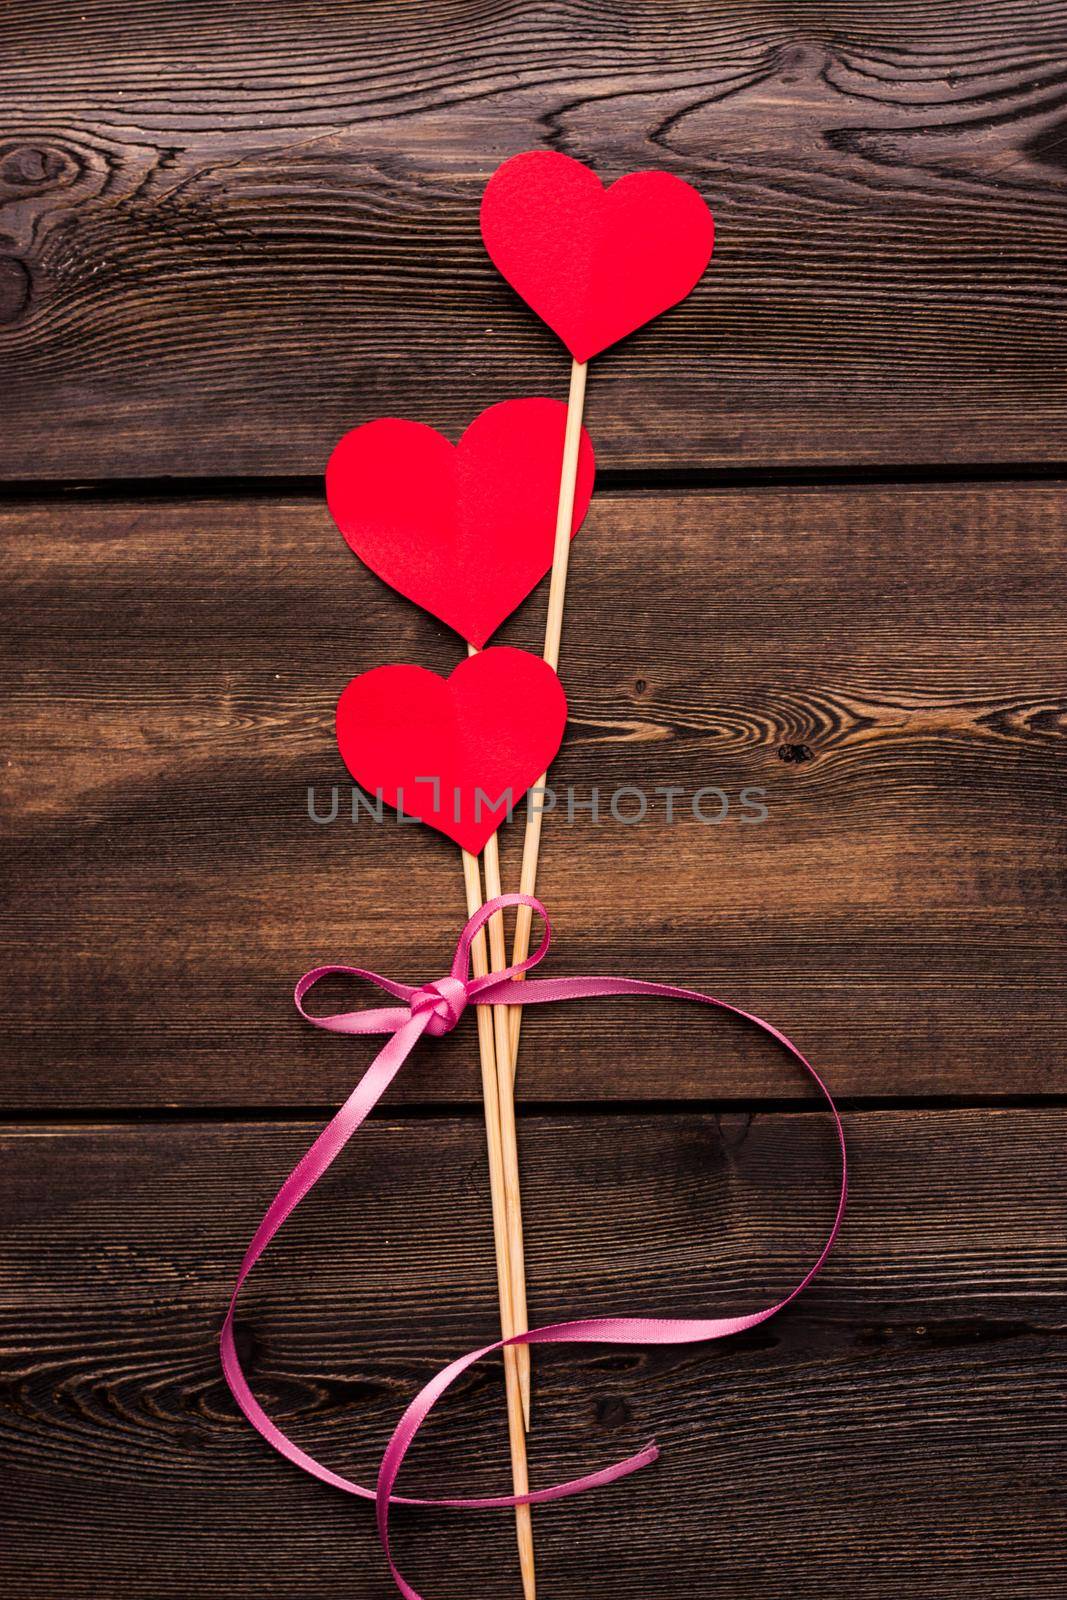 heart shaped flower gift holiday wooden background valentine. High quality photo